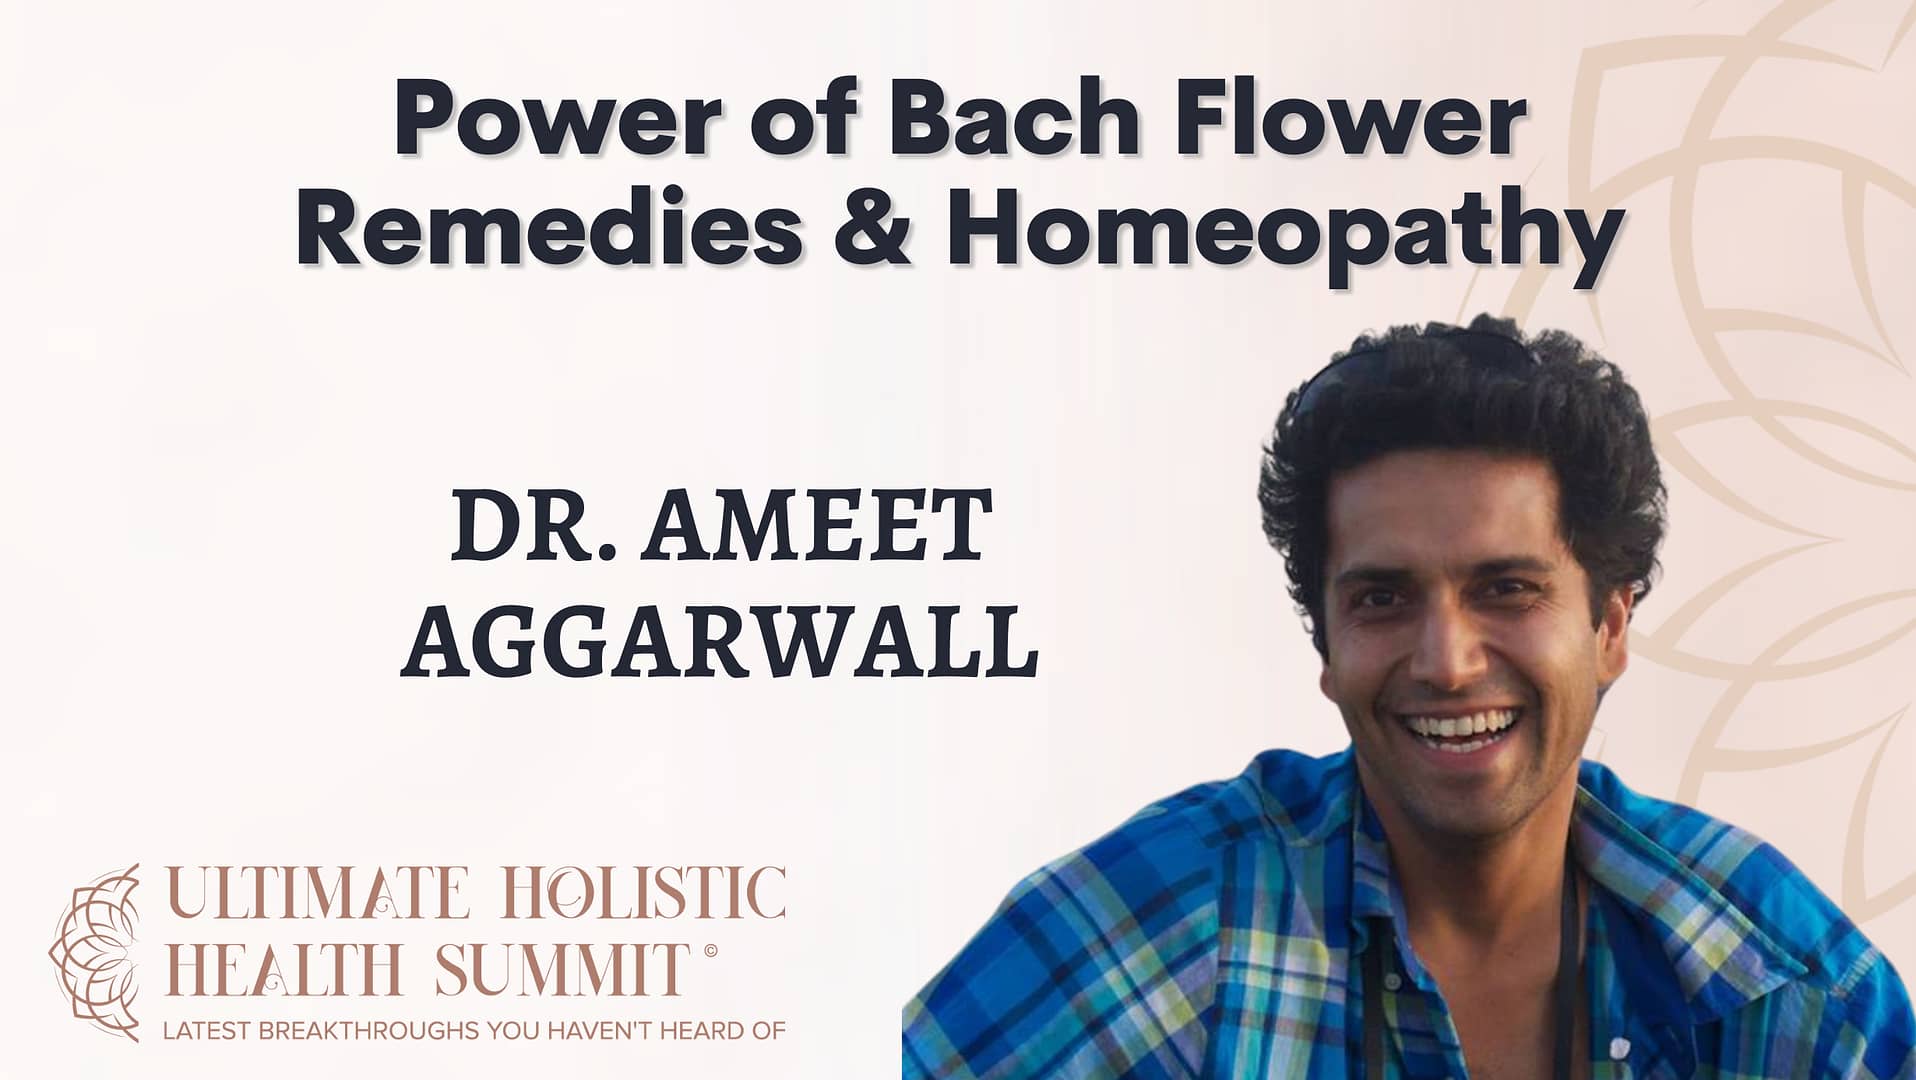 Power of Bach Flower Remedies & Homeopathy